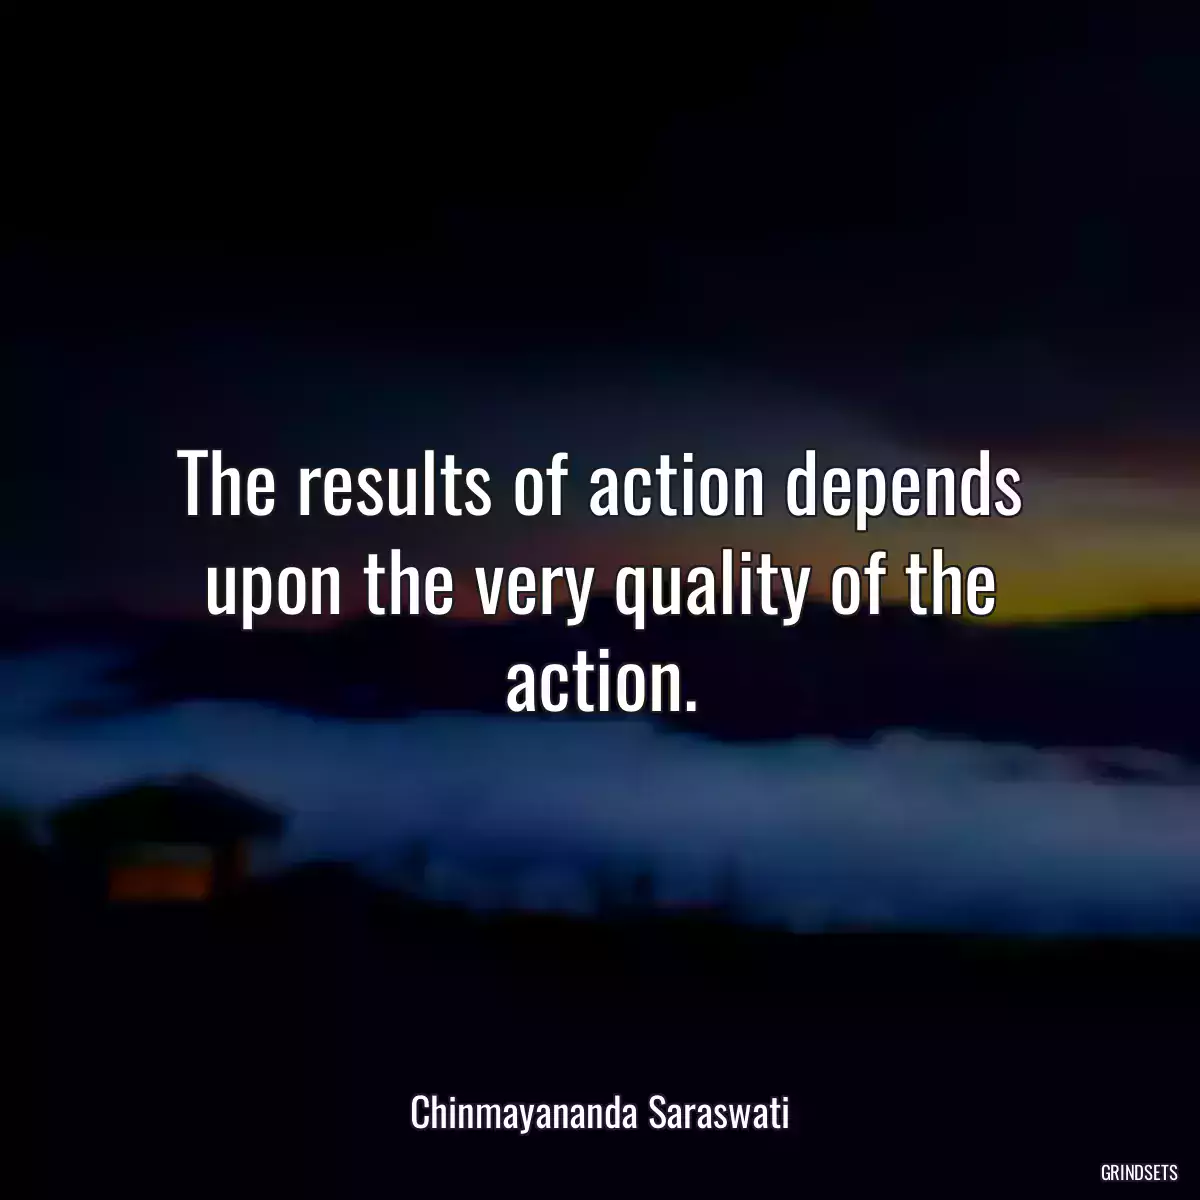 The results of action depends upon the very quality of the action.